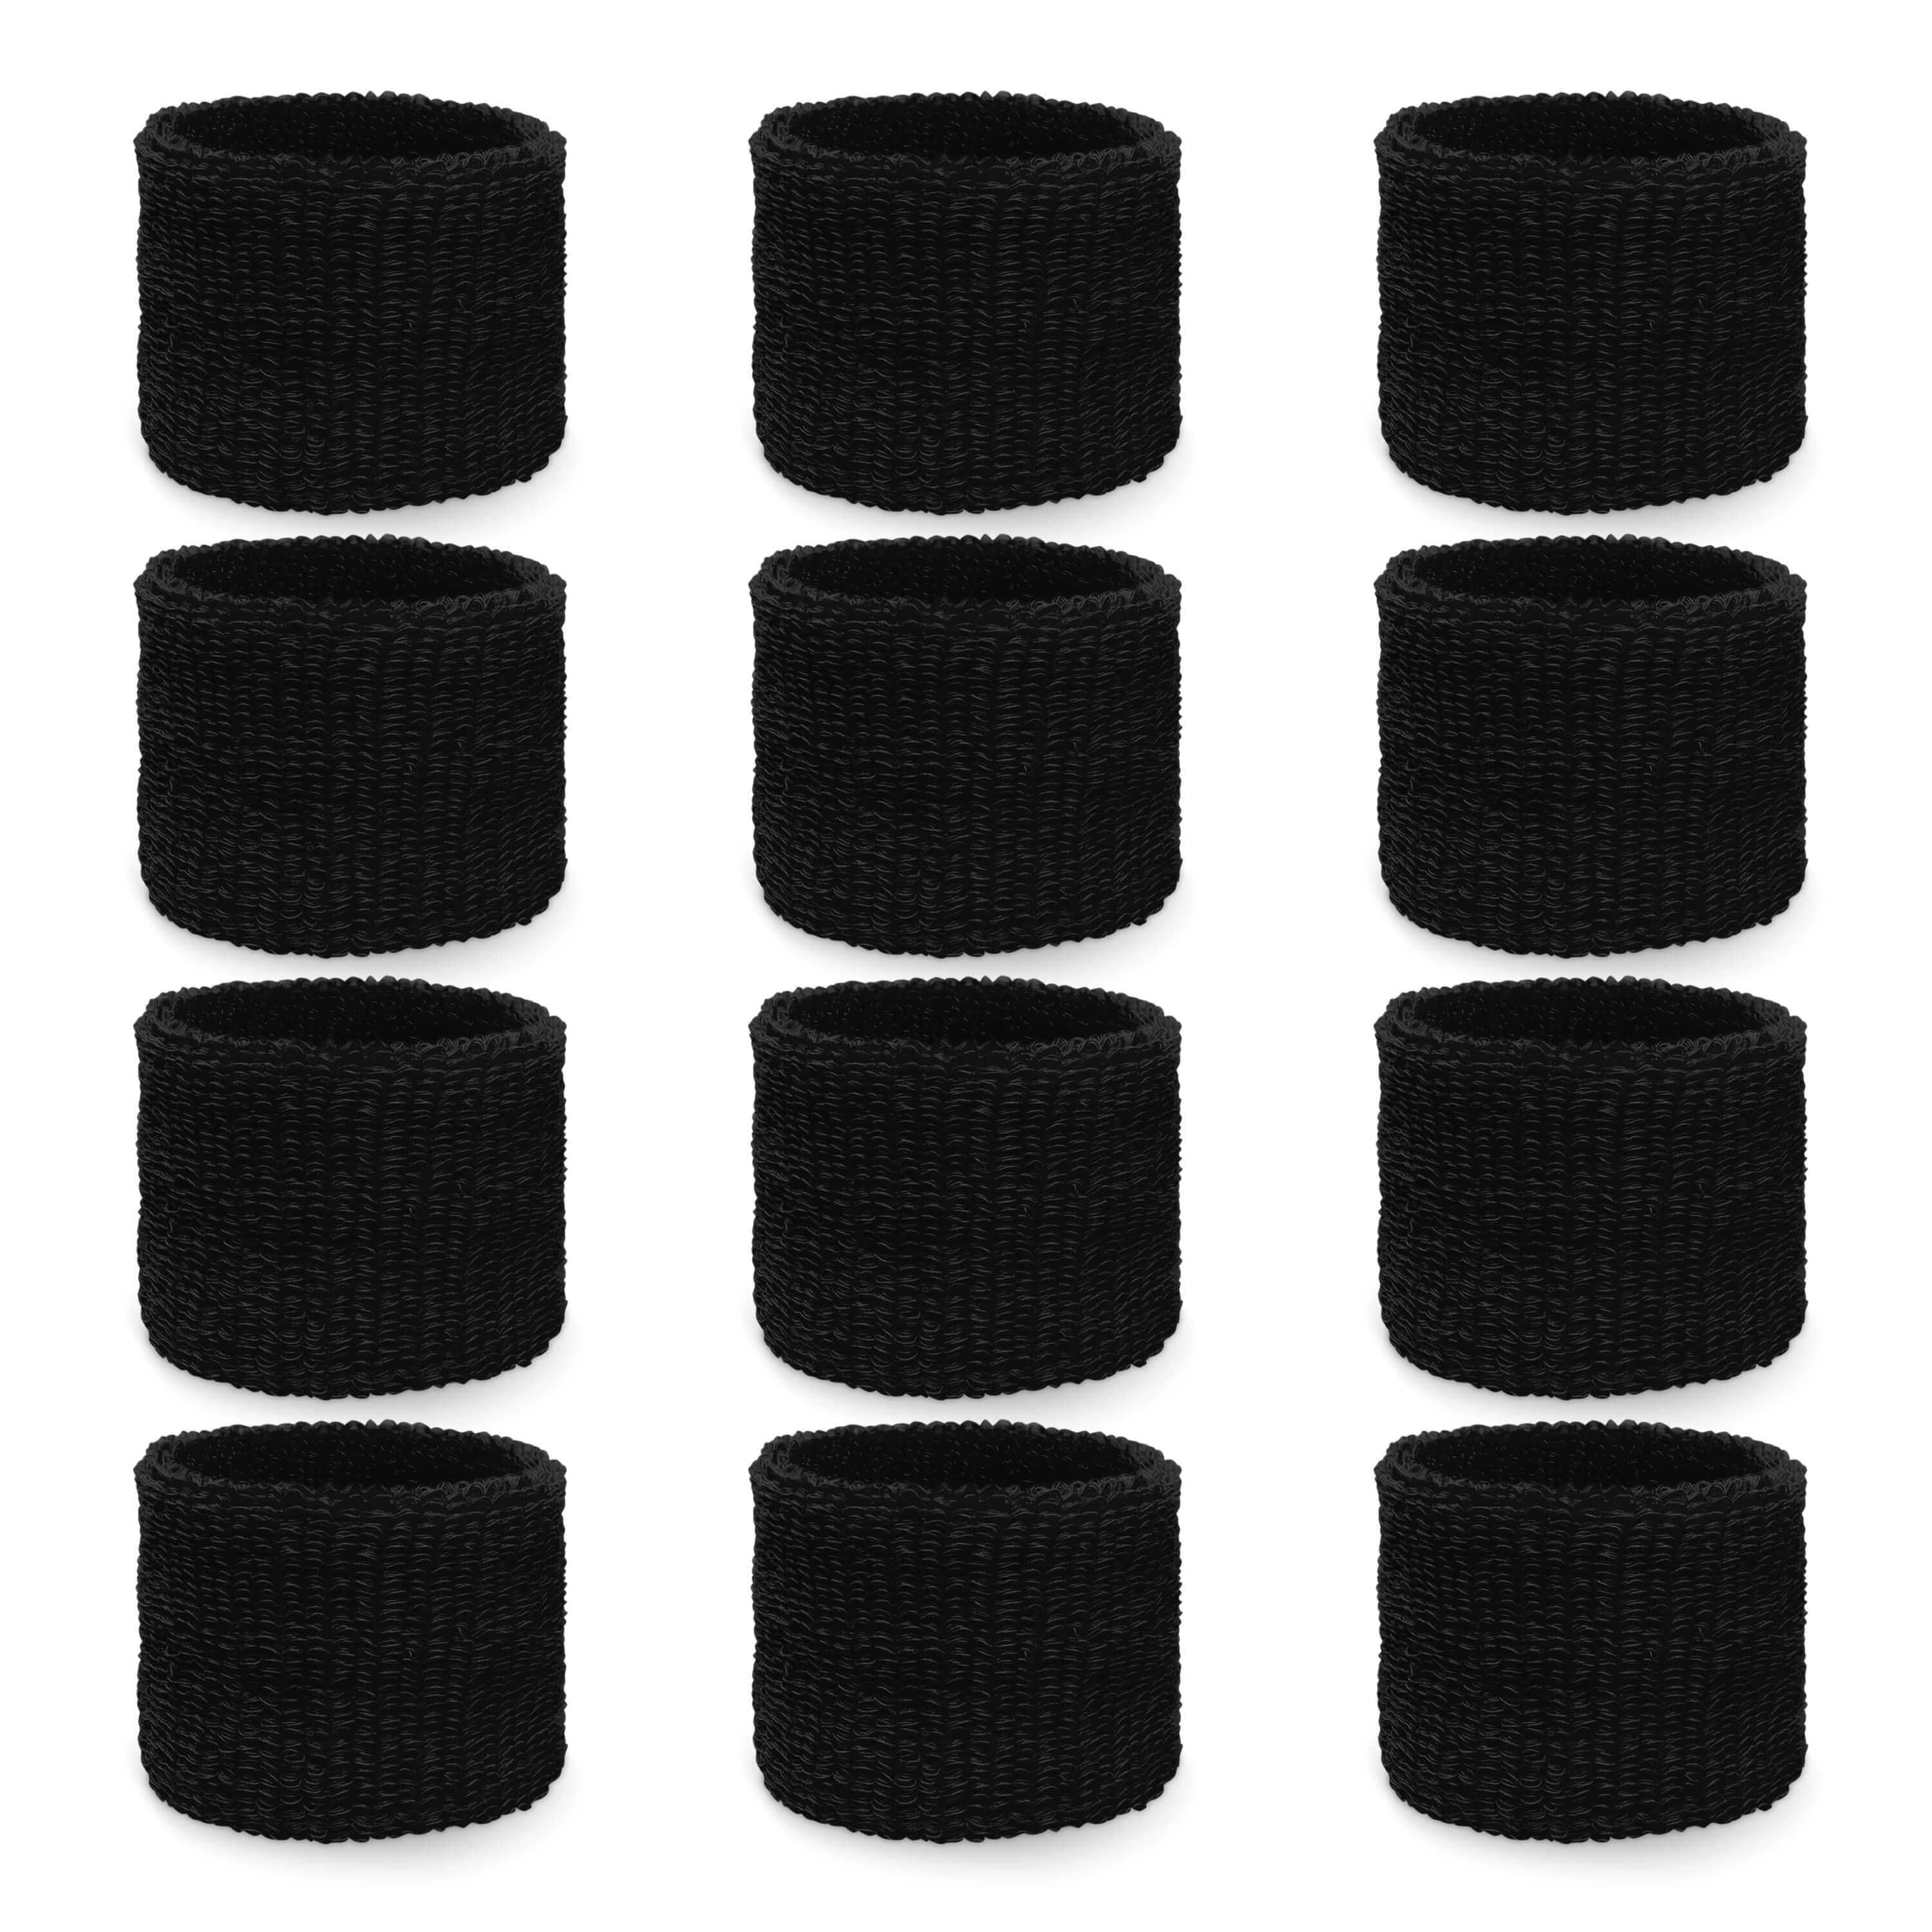 Black Youth Junior Wristbands Wholesale for School Church 6pairs